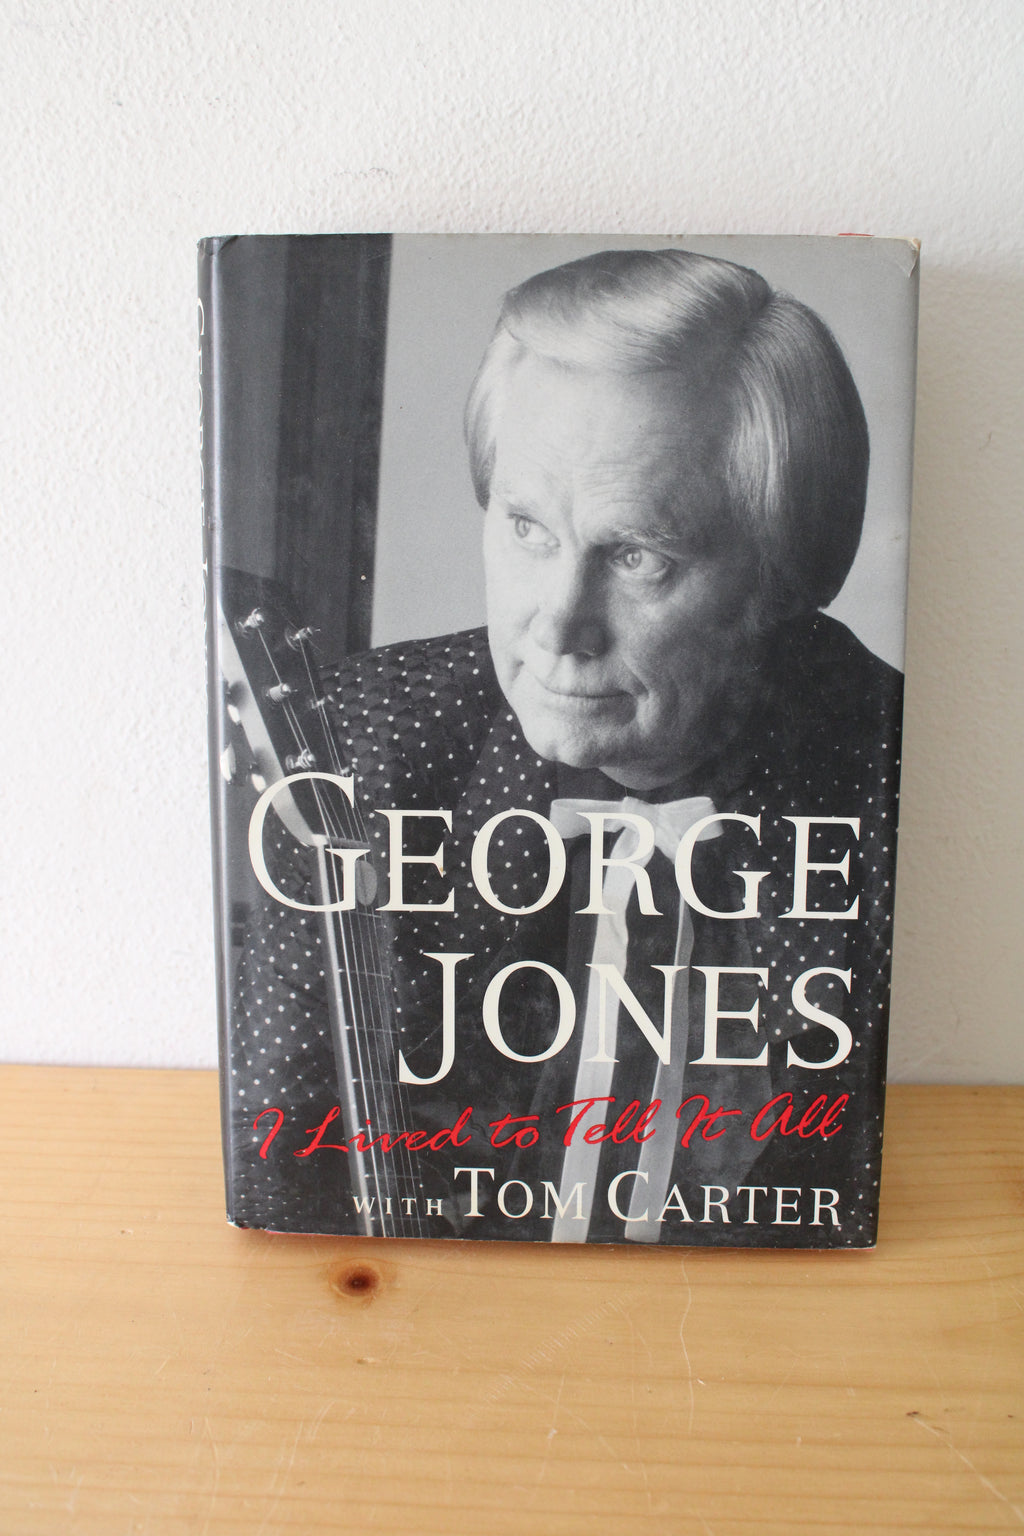 George Jones: I Lived To Tell It All (Signed Copy). With Tom Carter.